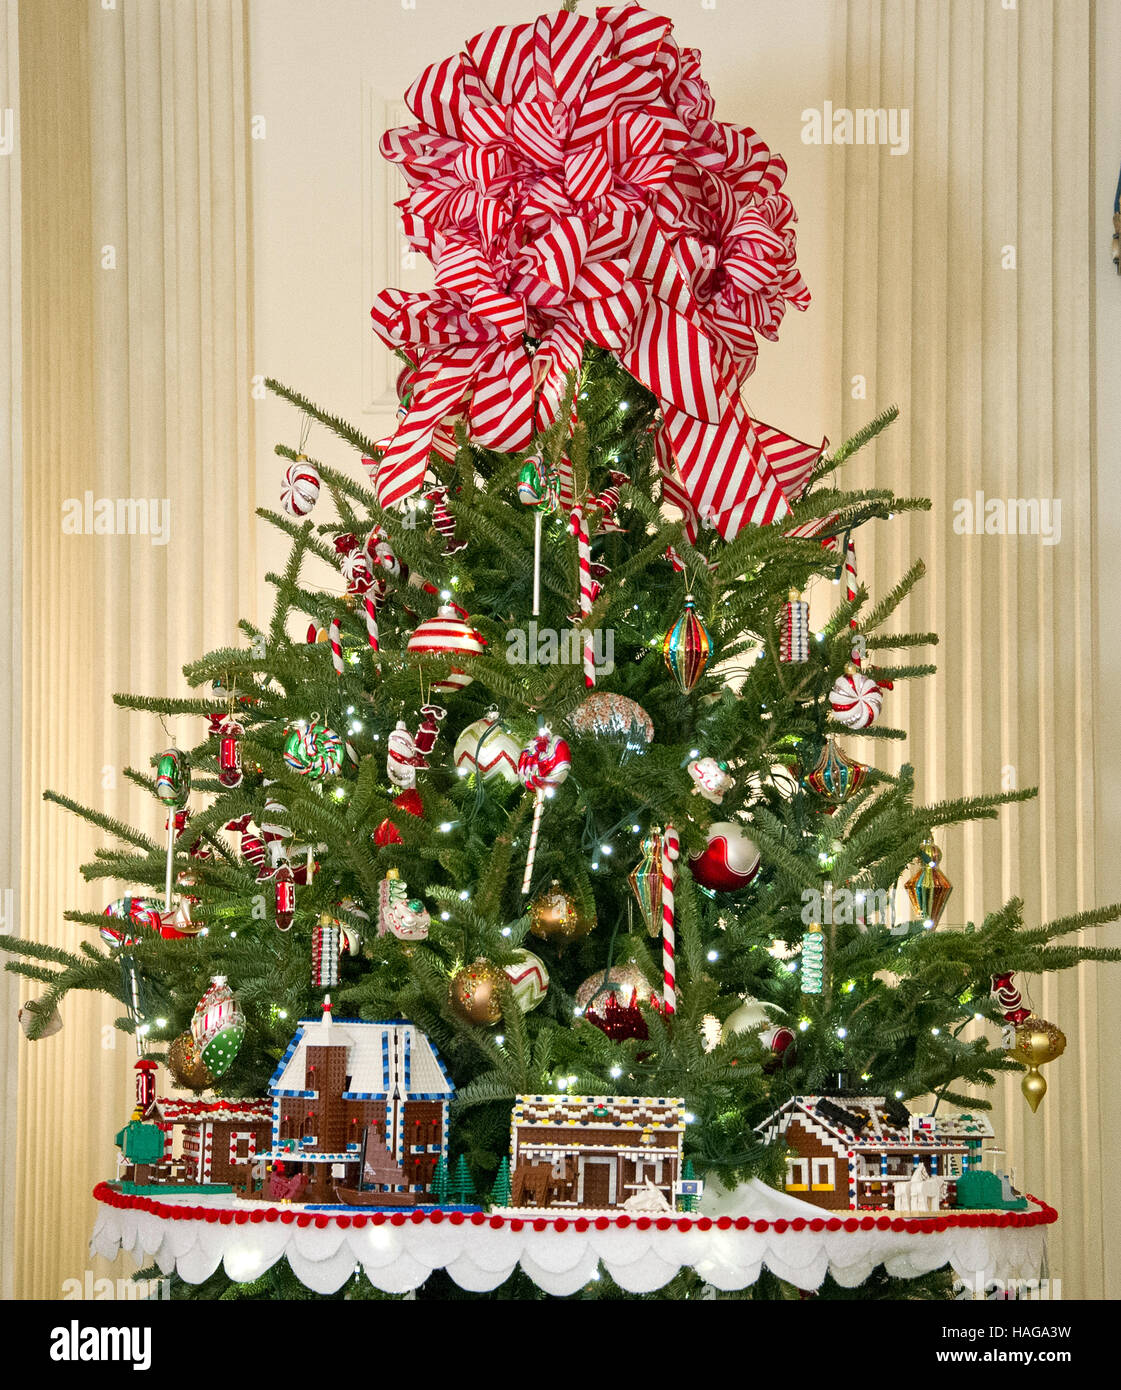 The 2016 White House Christmas decorations are previewed for the press at the White House in Washington, DC on Tuesday, November 29, 2016. On the mantle, a first-of-its-kind LEGO paper chain measuring approximately 18 feet long will hang alongside LEGO ·gingerfriends·, built from 4,900 LEGO bricks. The first lady's office released the following statement to describe those decorations, 'This year·s holiday theme, 'The Gift of the Holidays, ' reflects on not only the joy of giving and receiving, but also the true gifts of life, such as service, friends and family, education, and good health, as  Stock Photo